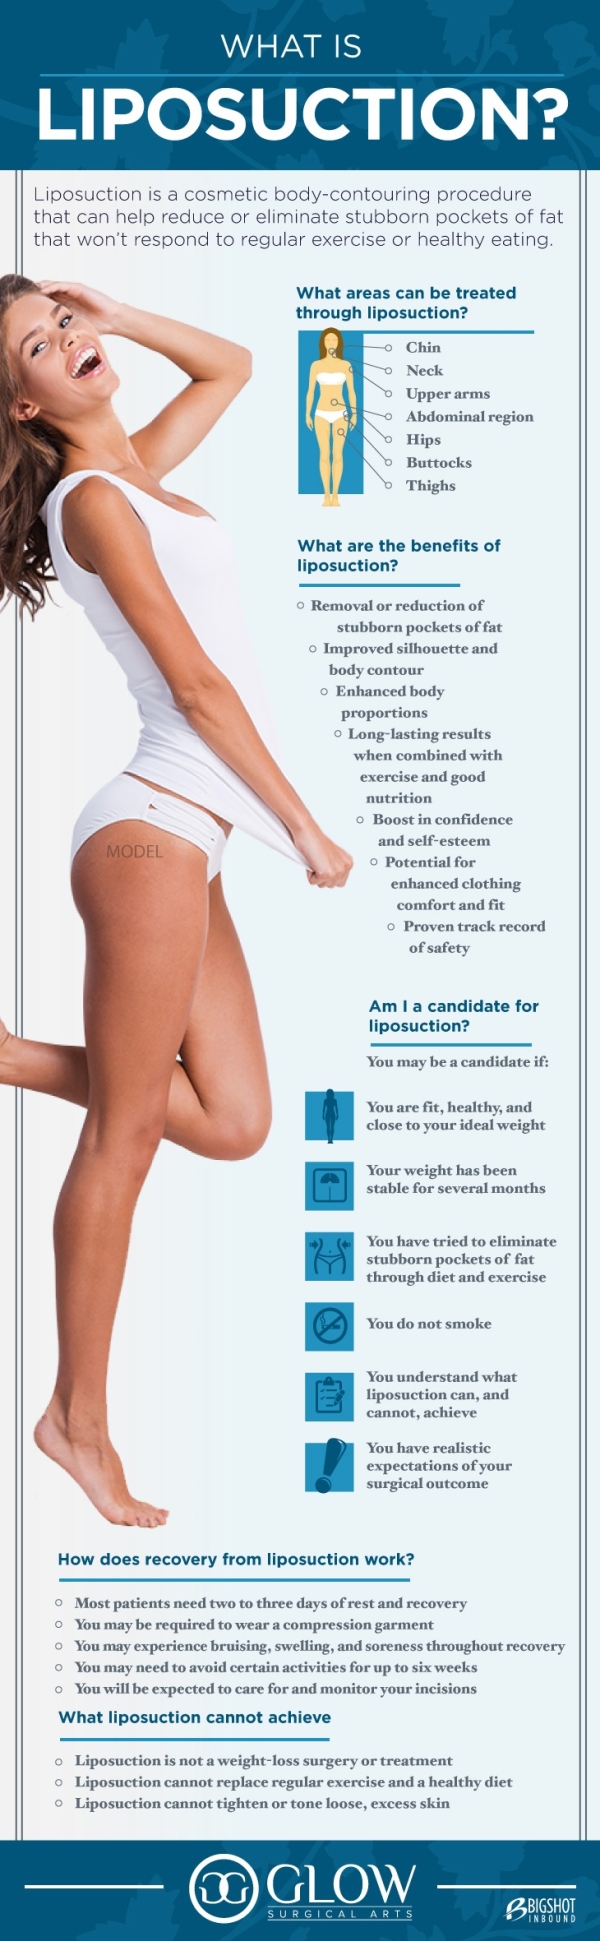 How Can I Improve My Body Contours With Liposuction?